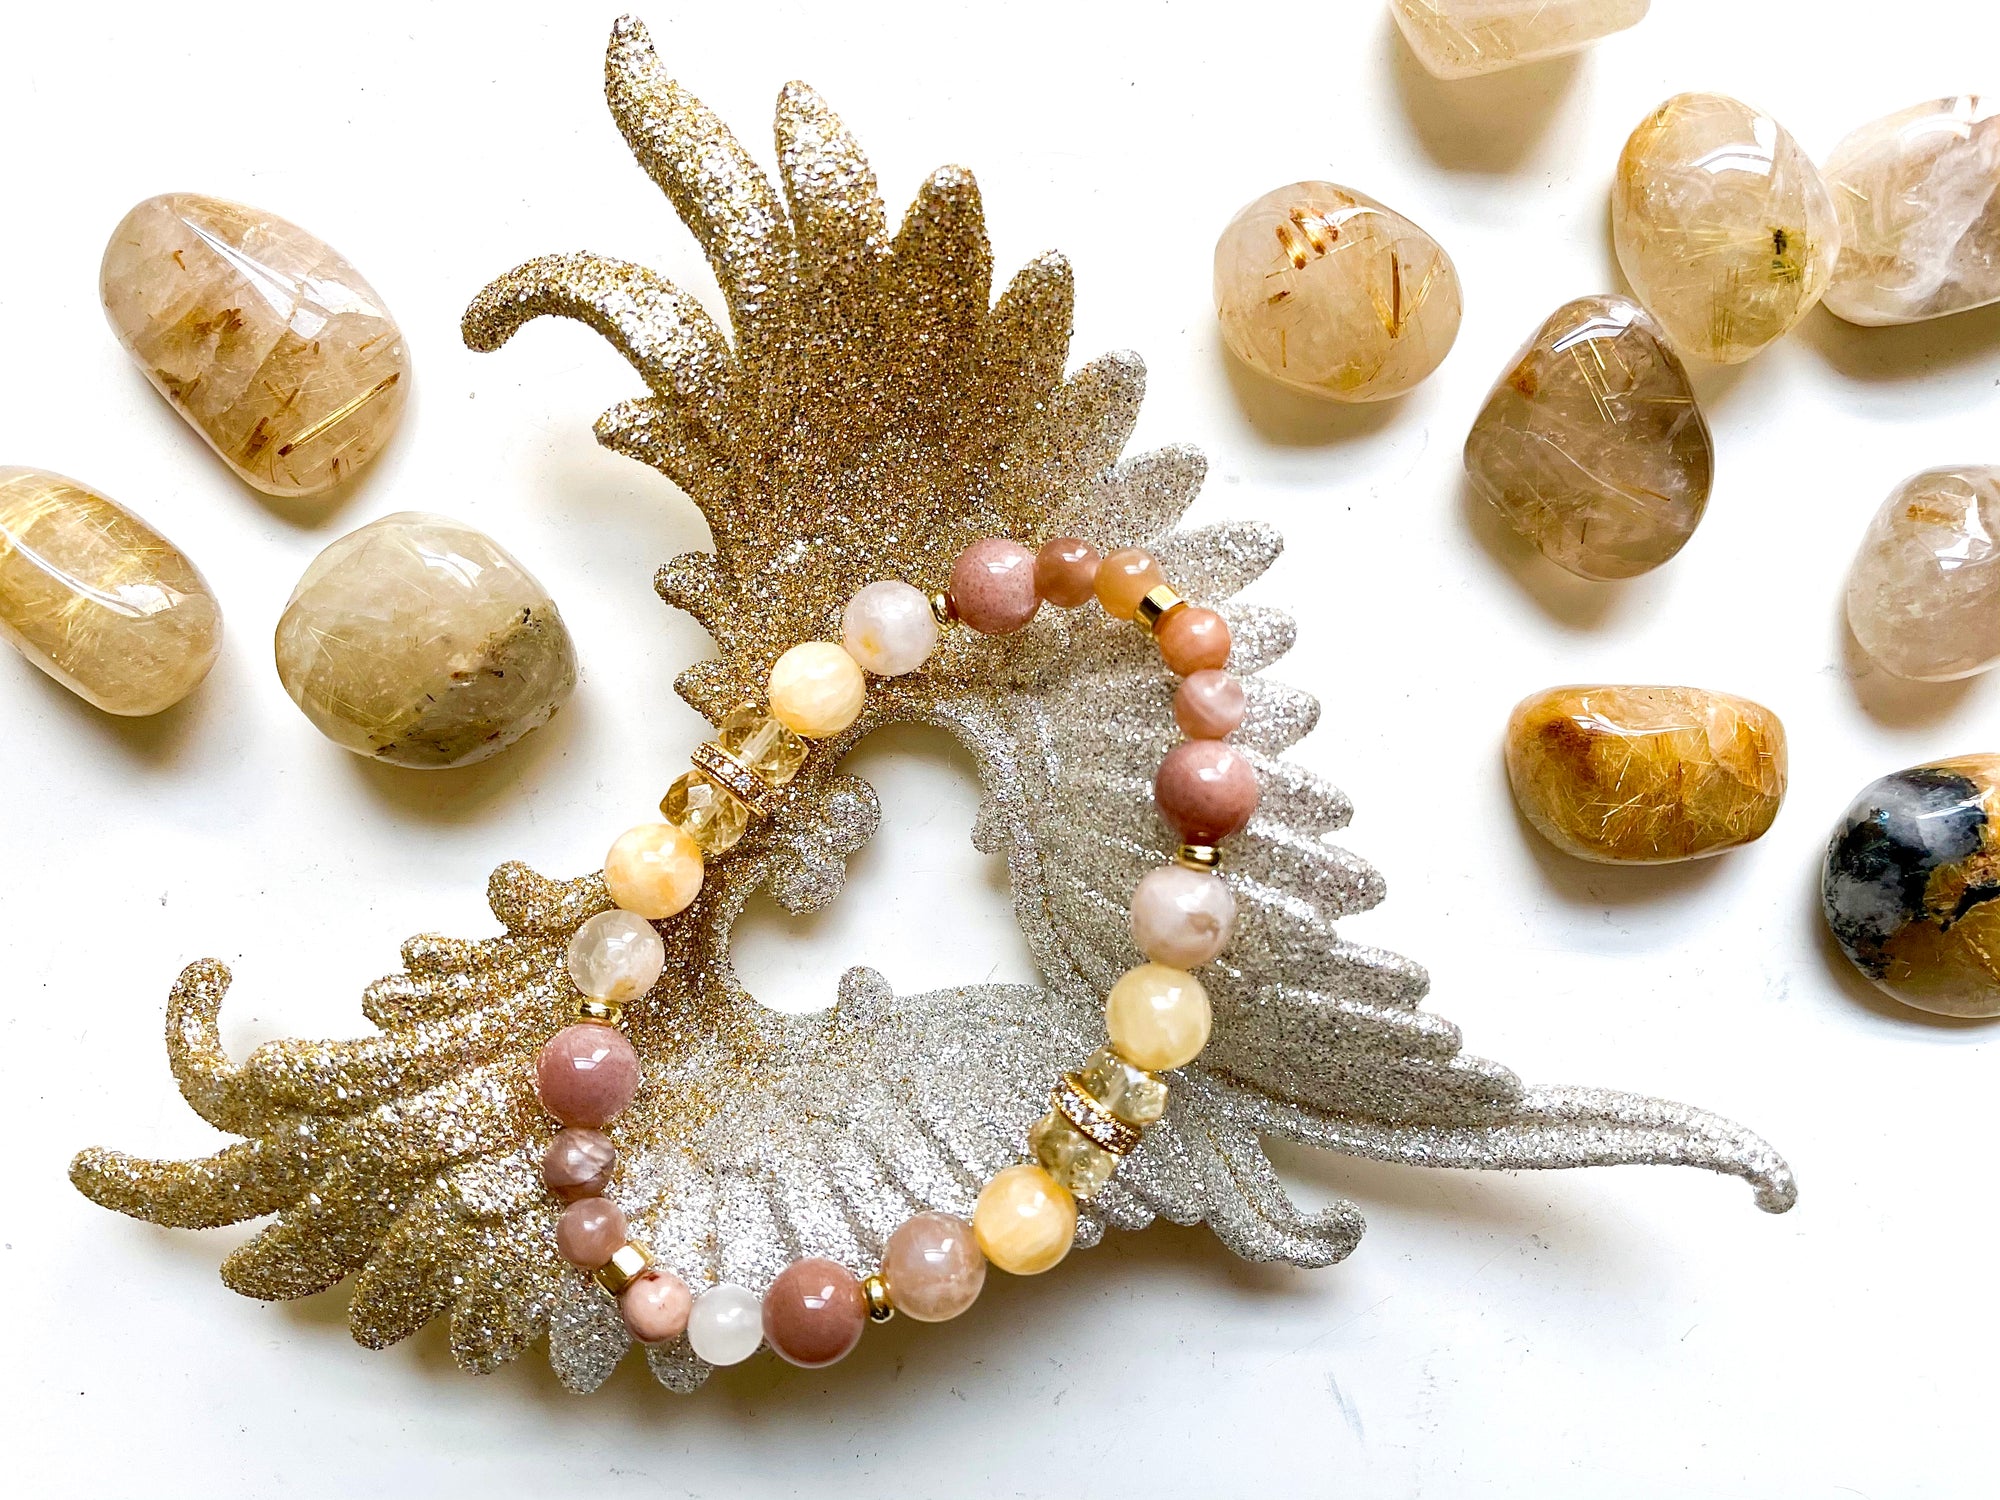 Connecting with Archangels || Archangel Azrael || Bracelet with Yellow Calcite, Flower Agate, Moonstone & Citrine